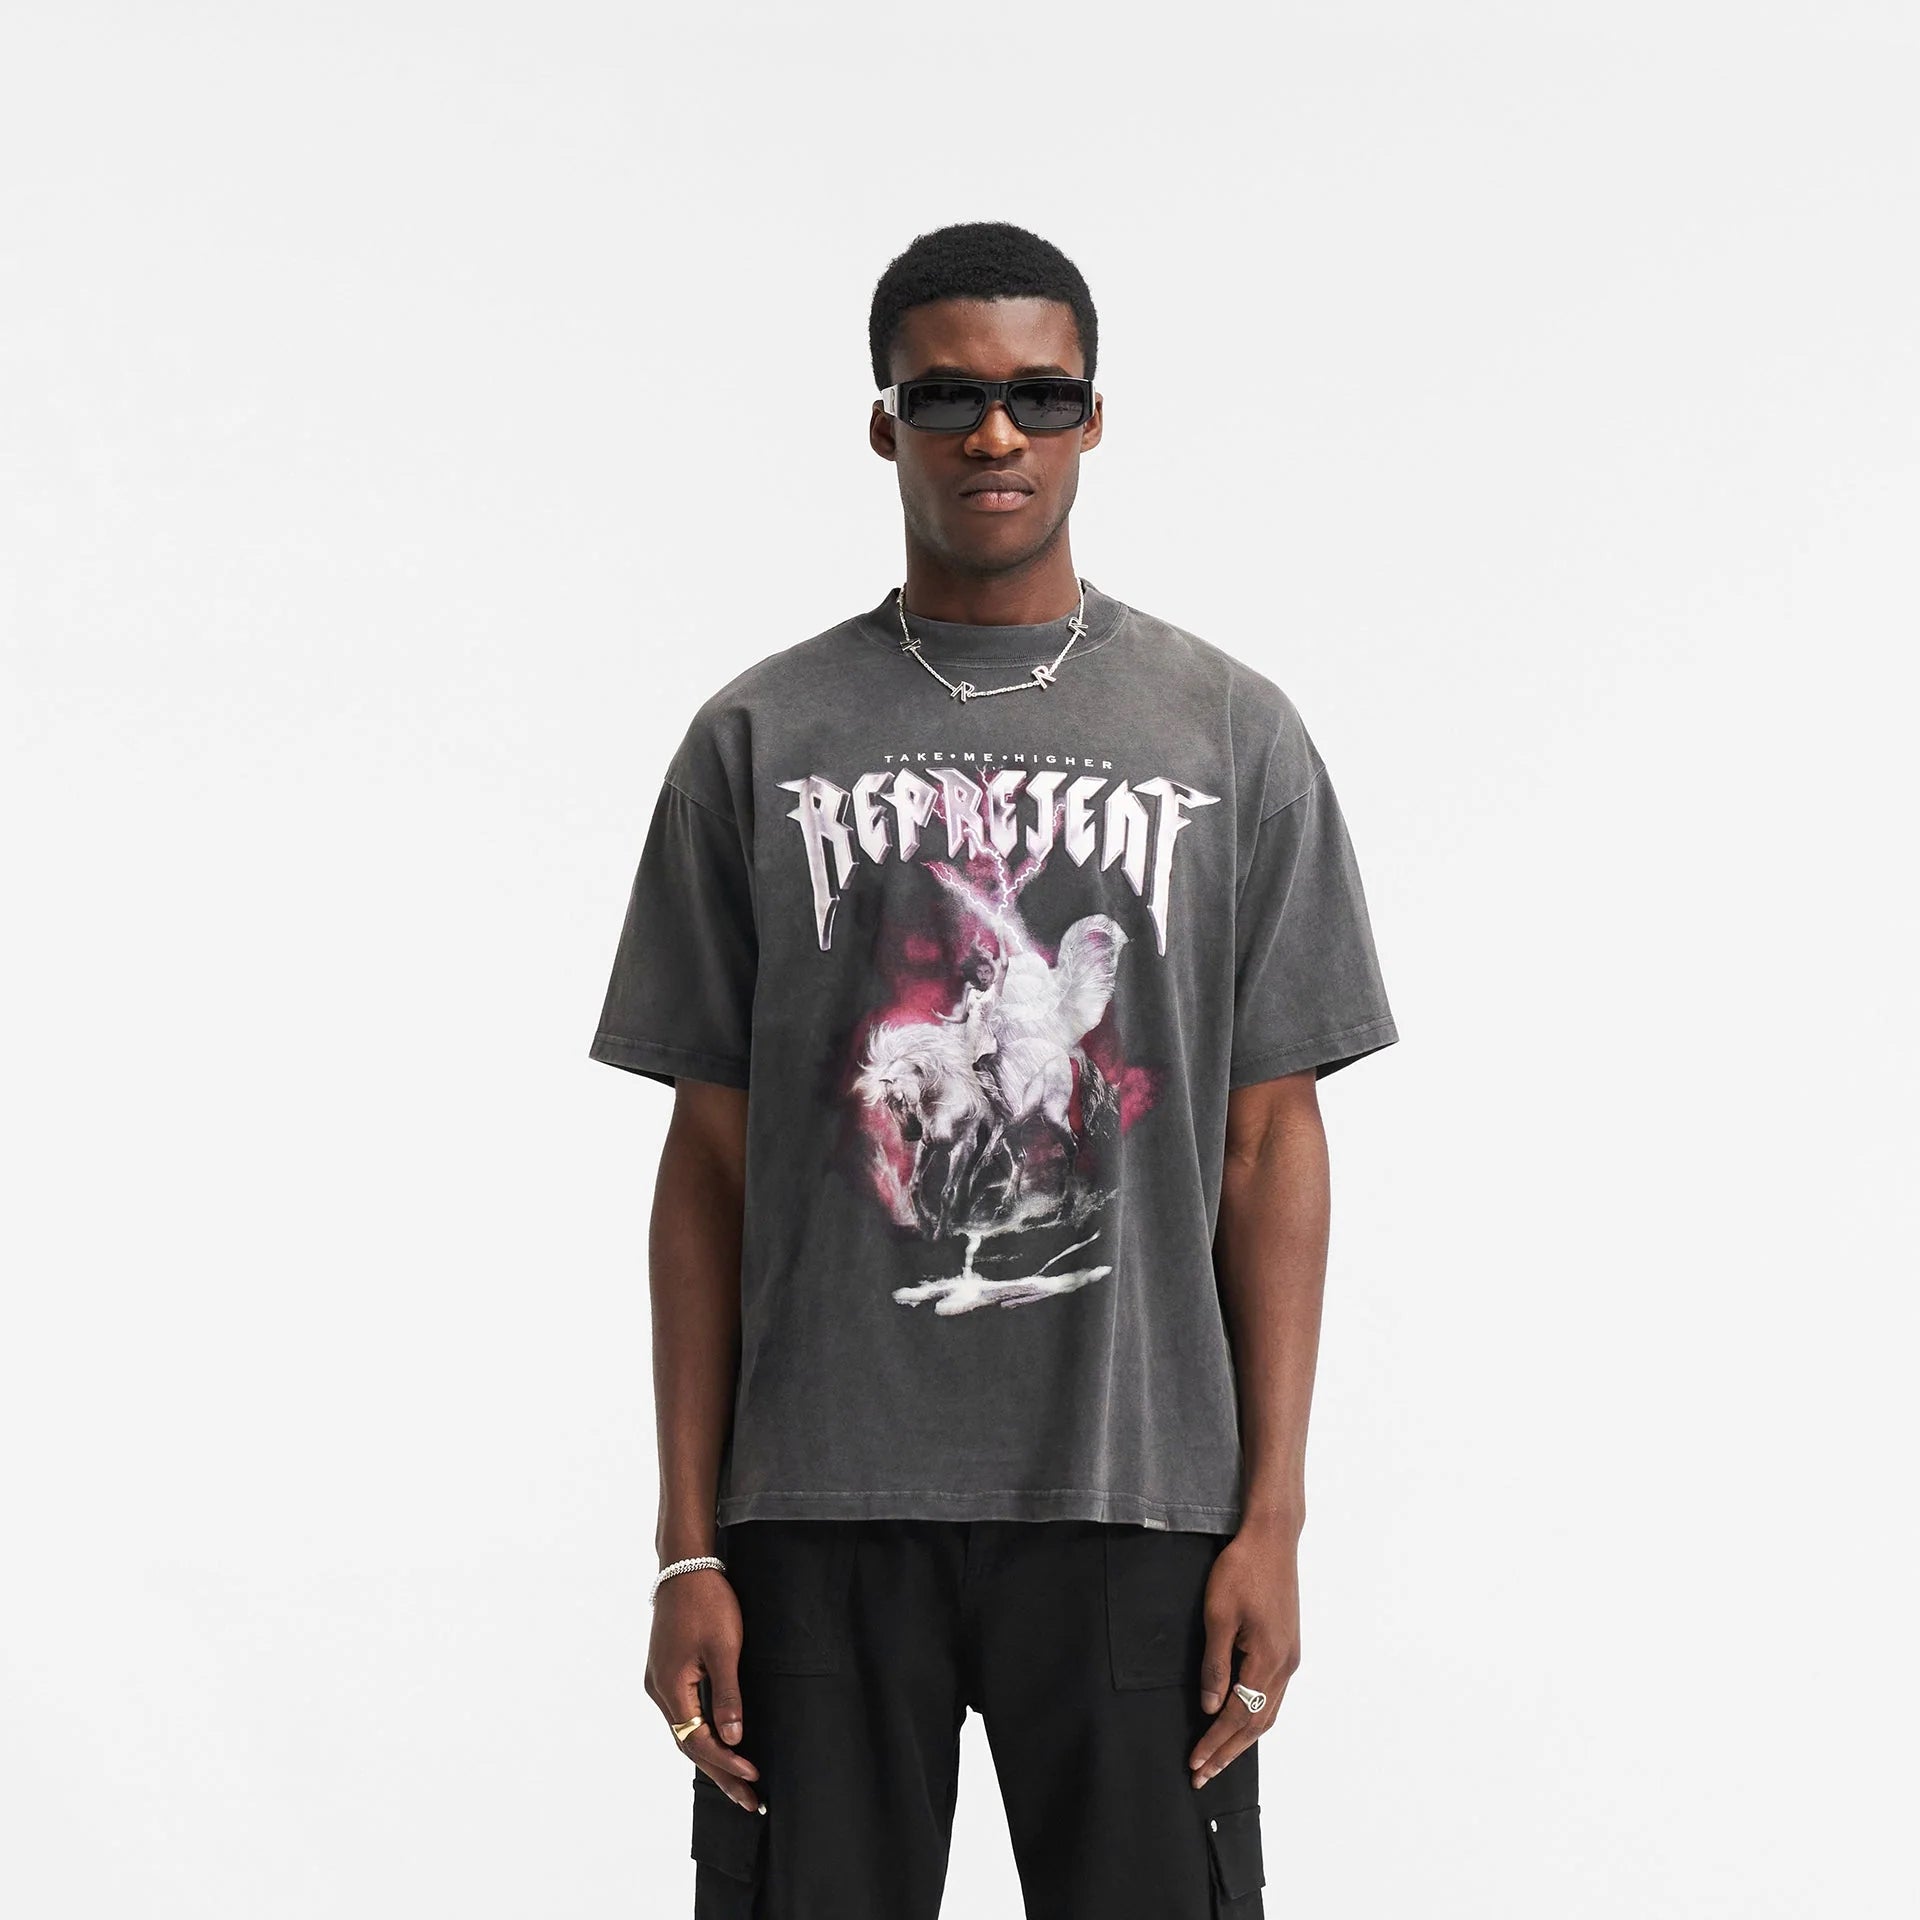 IMMORTAL OVERSIZED T-SHIRT FADED GREY – Drip by Rage